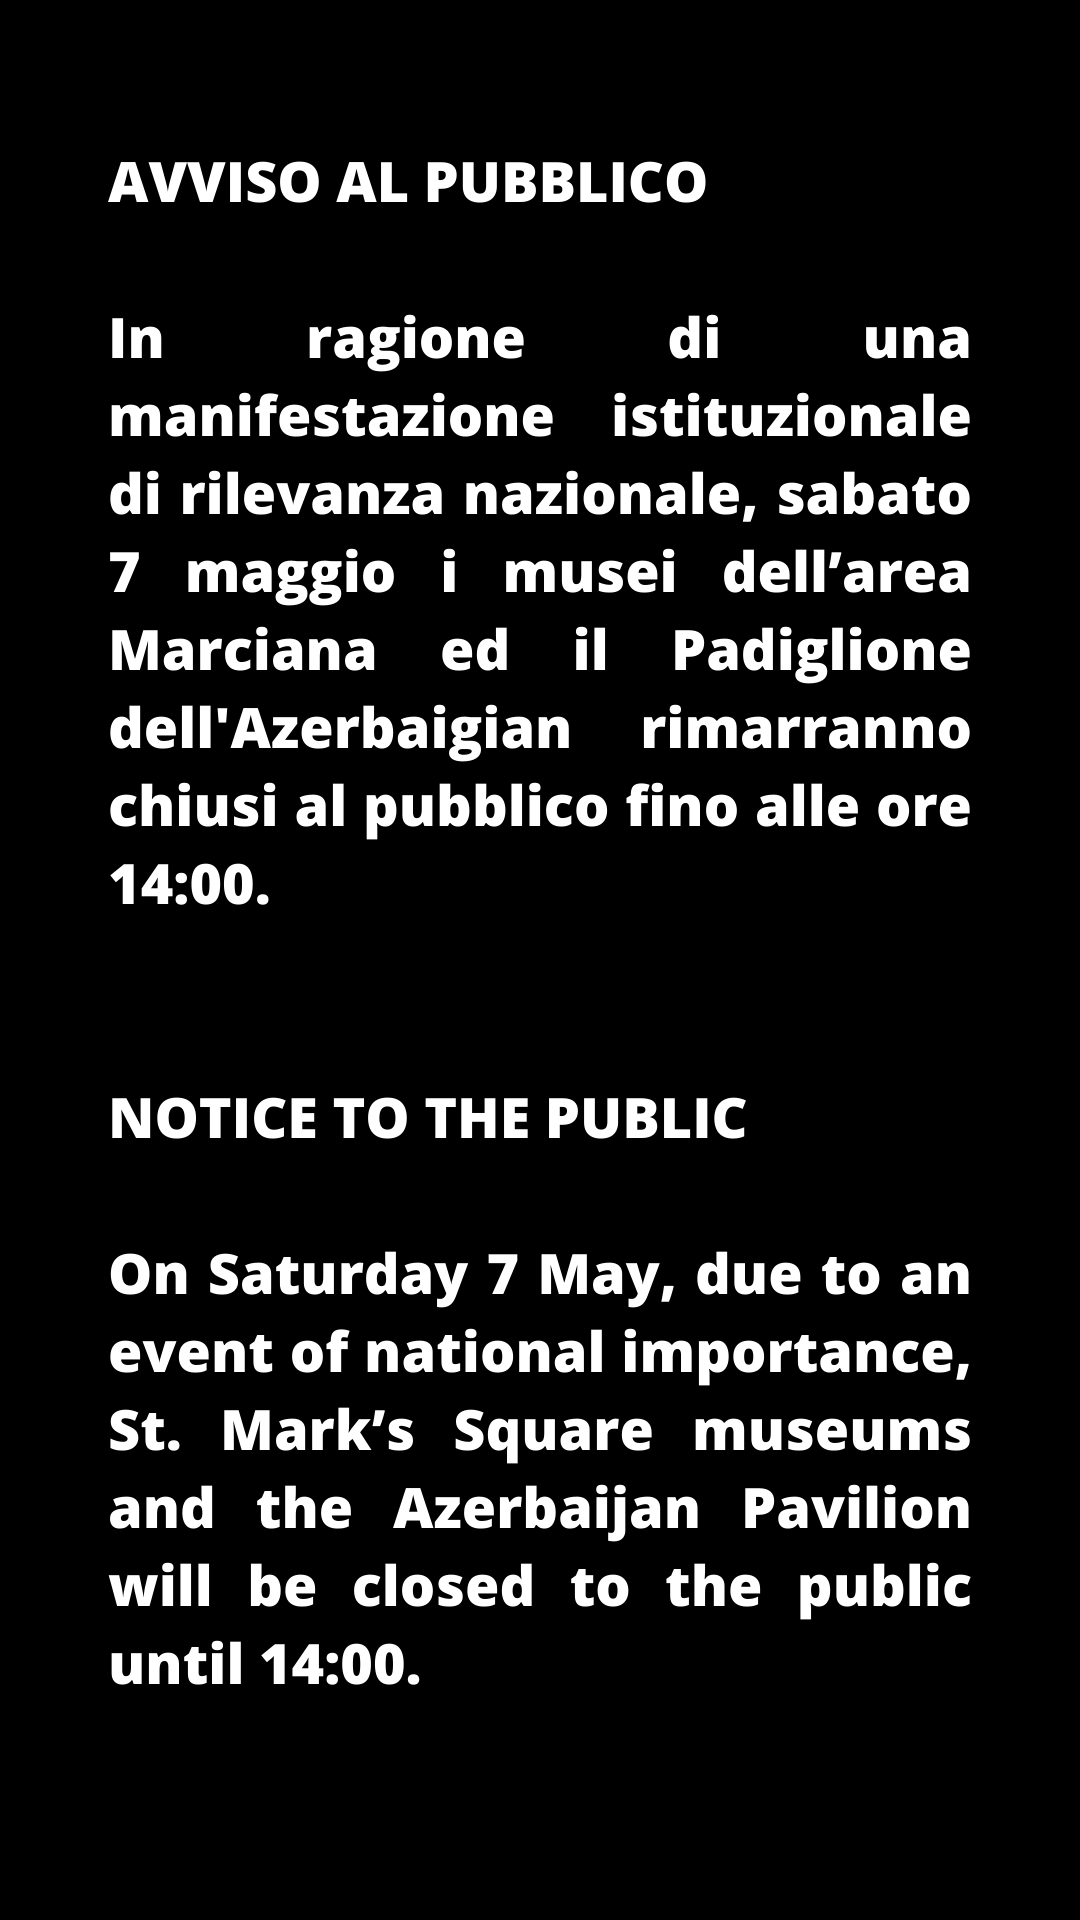 NOTICE TO THE PUBLIC On Saturday 7 May due to an event of national importance St. Marks Square museums Doges Palace and the combined itinerary of Museo Correr Museo Archeologico Nazionale and Monumental Rooms